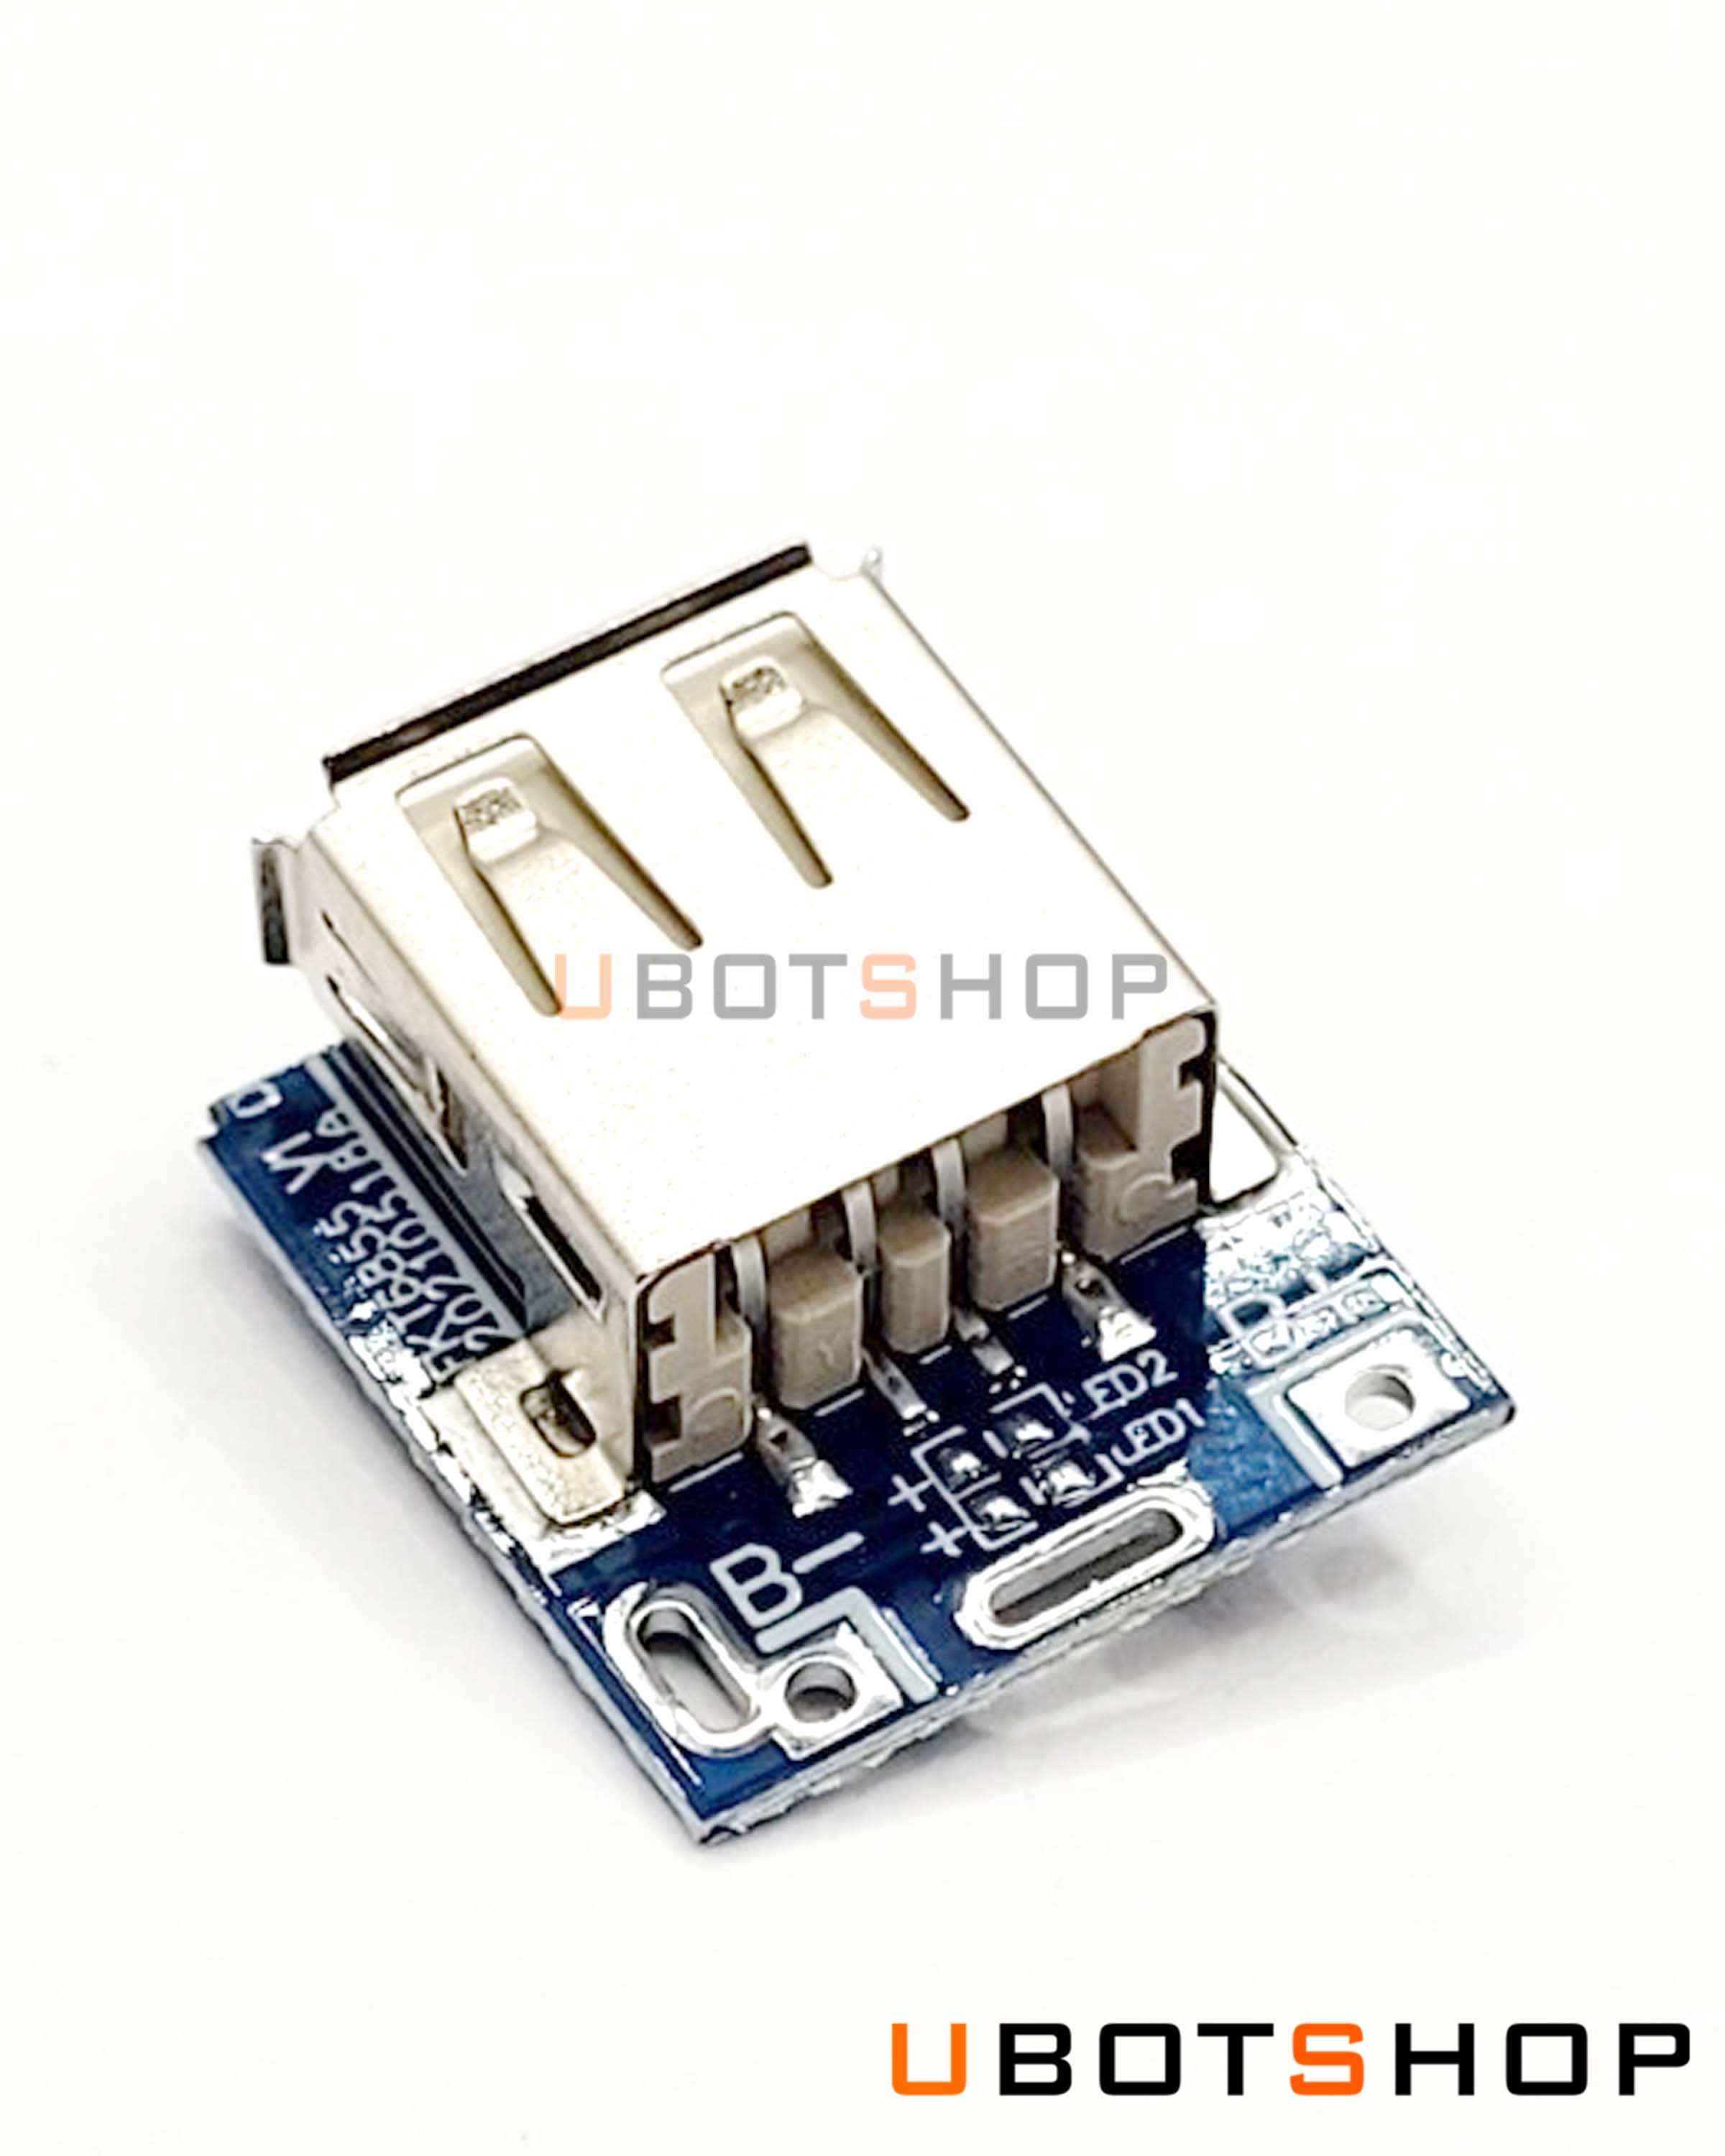 Lithium 3.7v to 5v USB Power Module Lithium Battery Charging Protection Board Boost Converter LED Display USB For DIY Charger(PB0007)